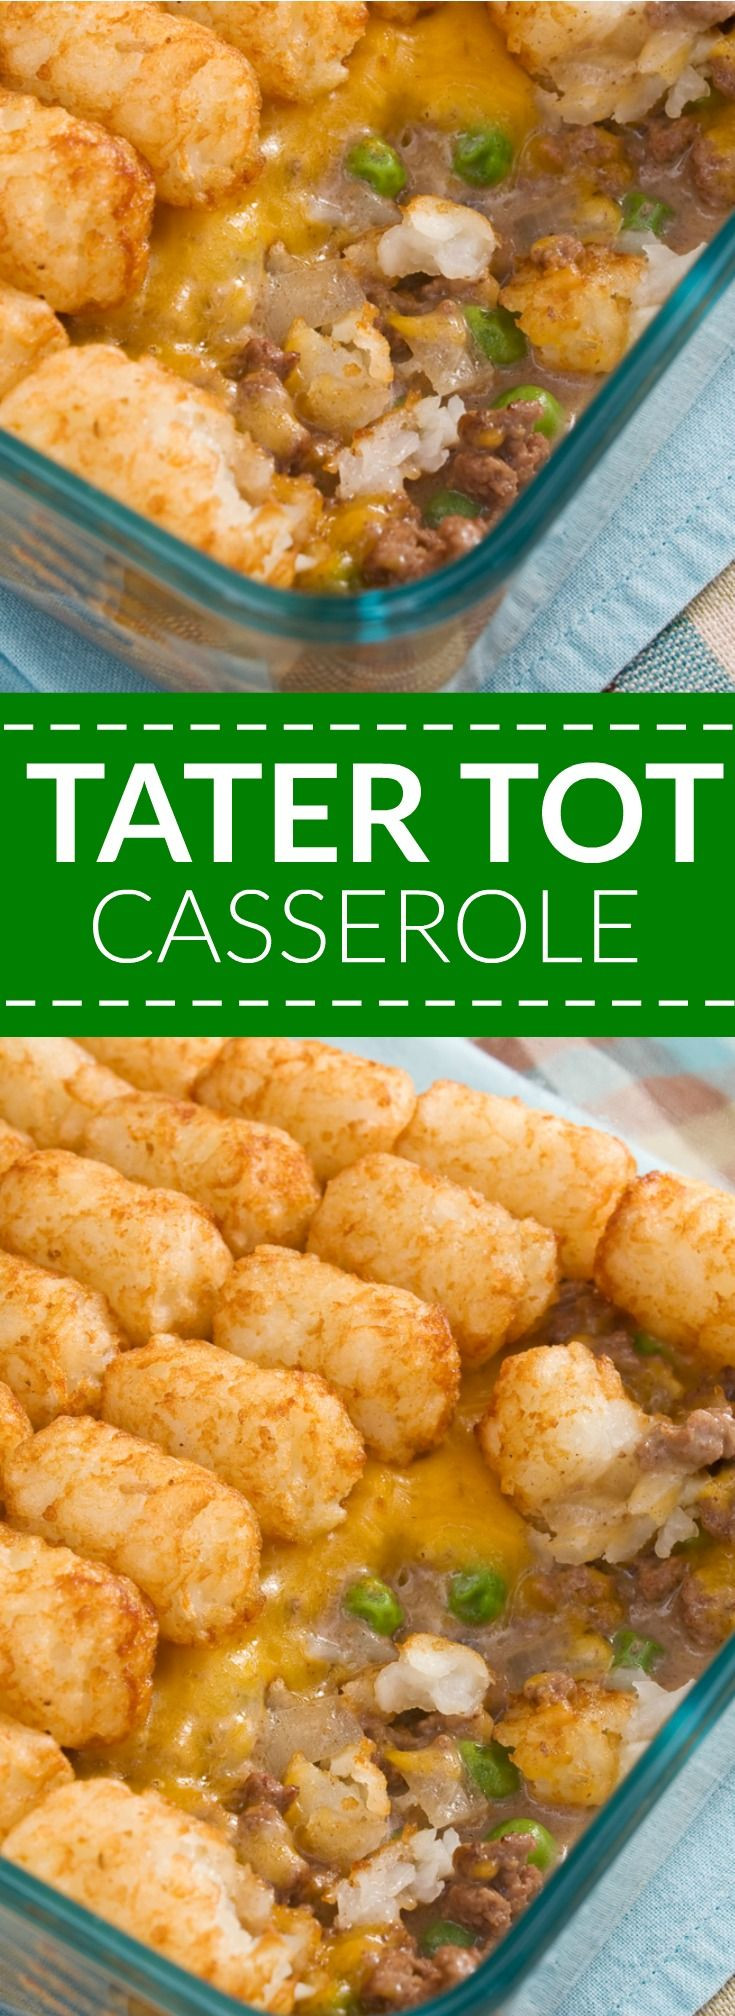 Gluten Free Recipes With Ground Beef
 Ground Beef and Tater Tot Casserole Gluten Free